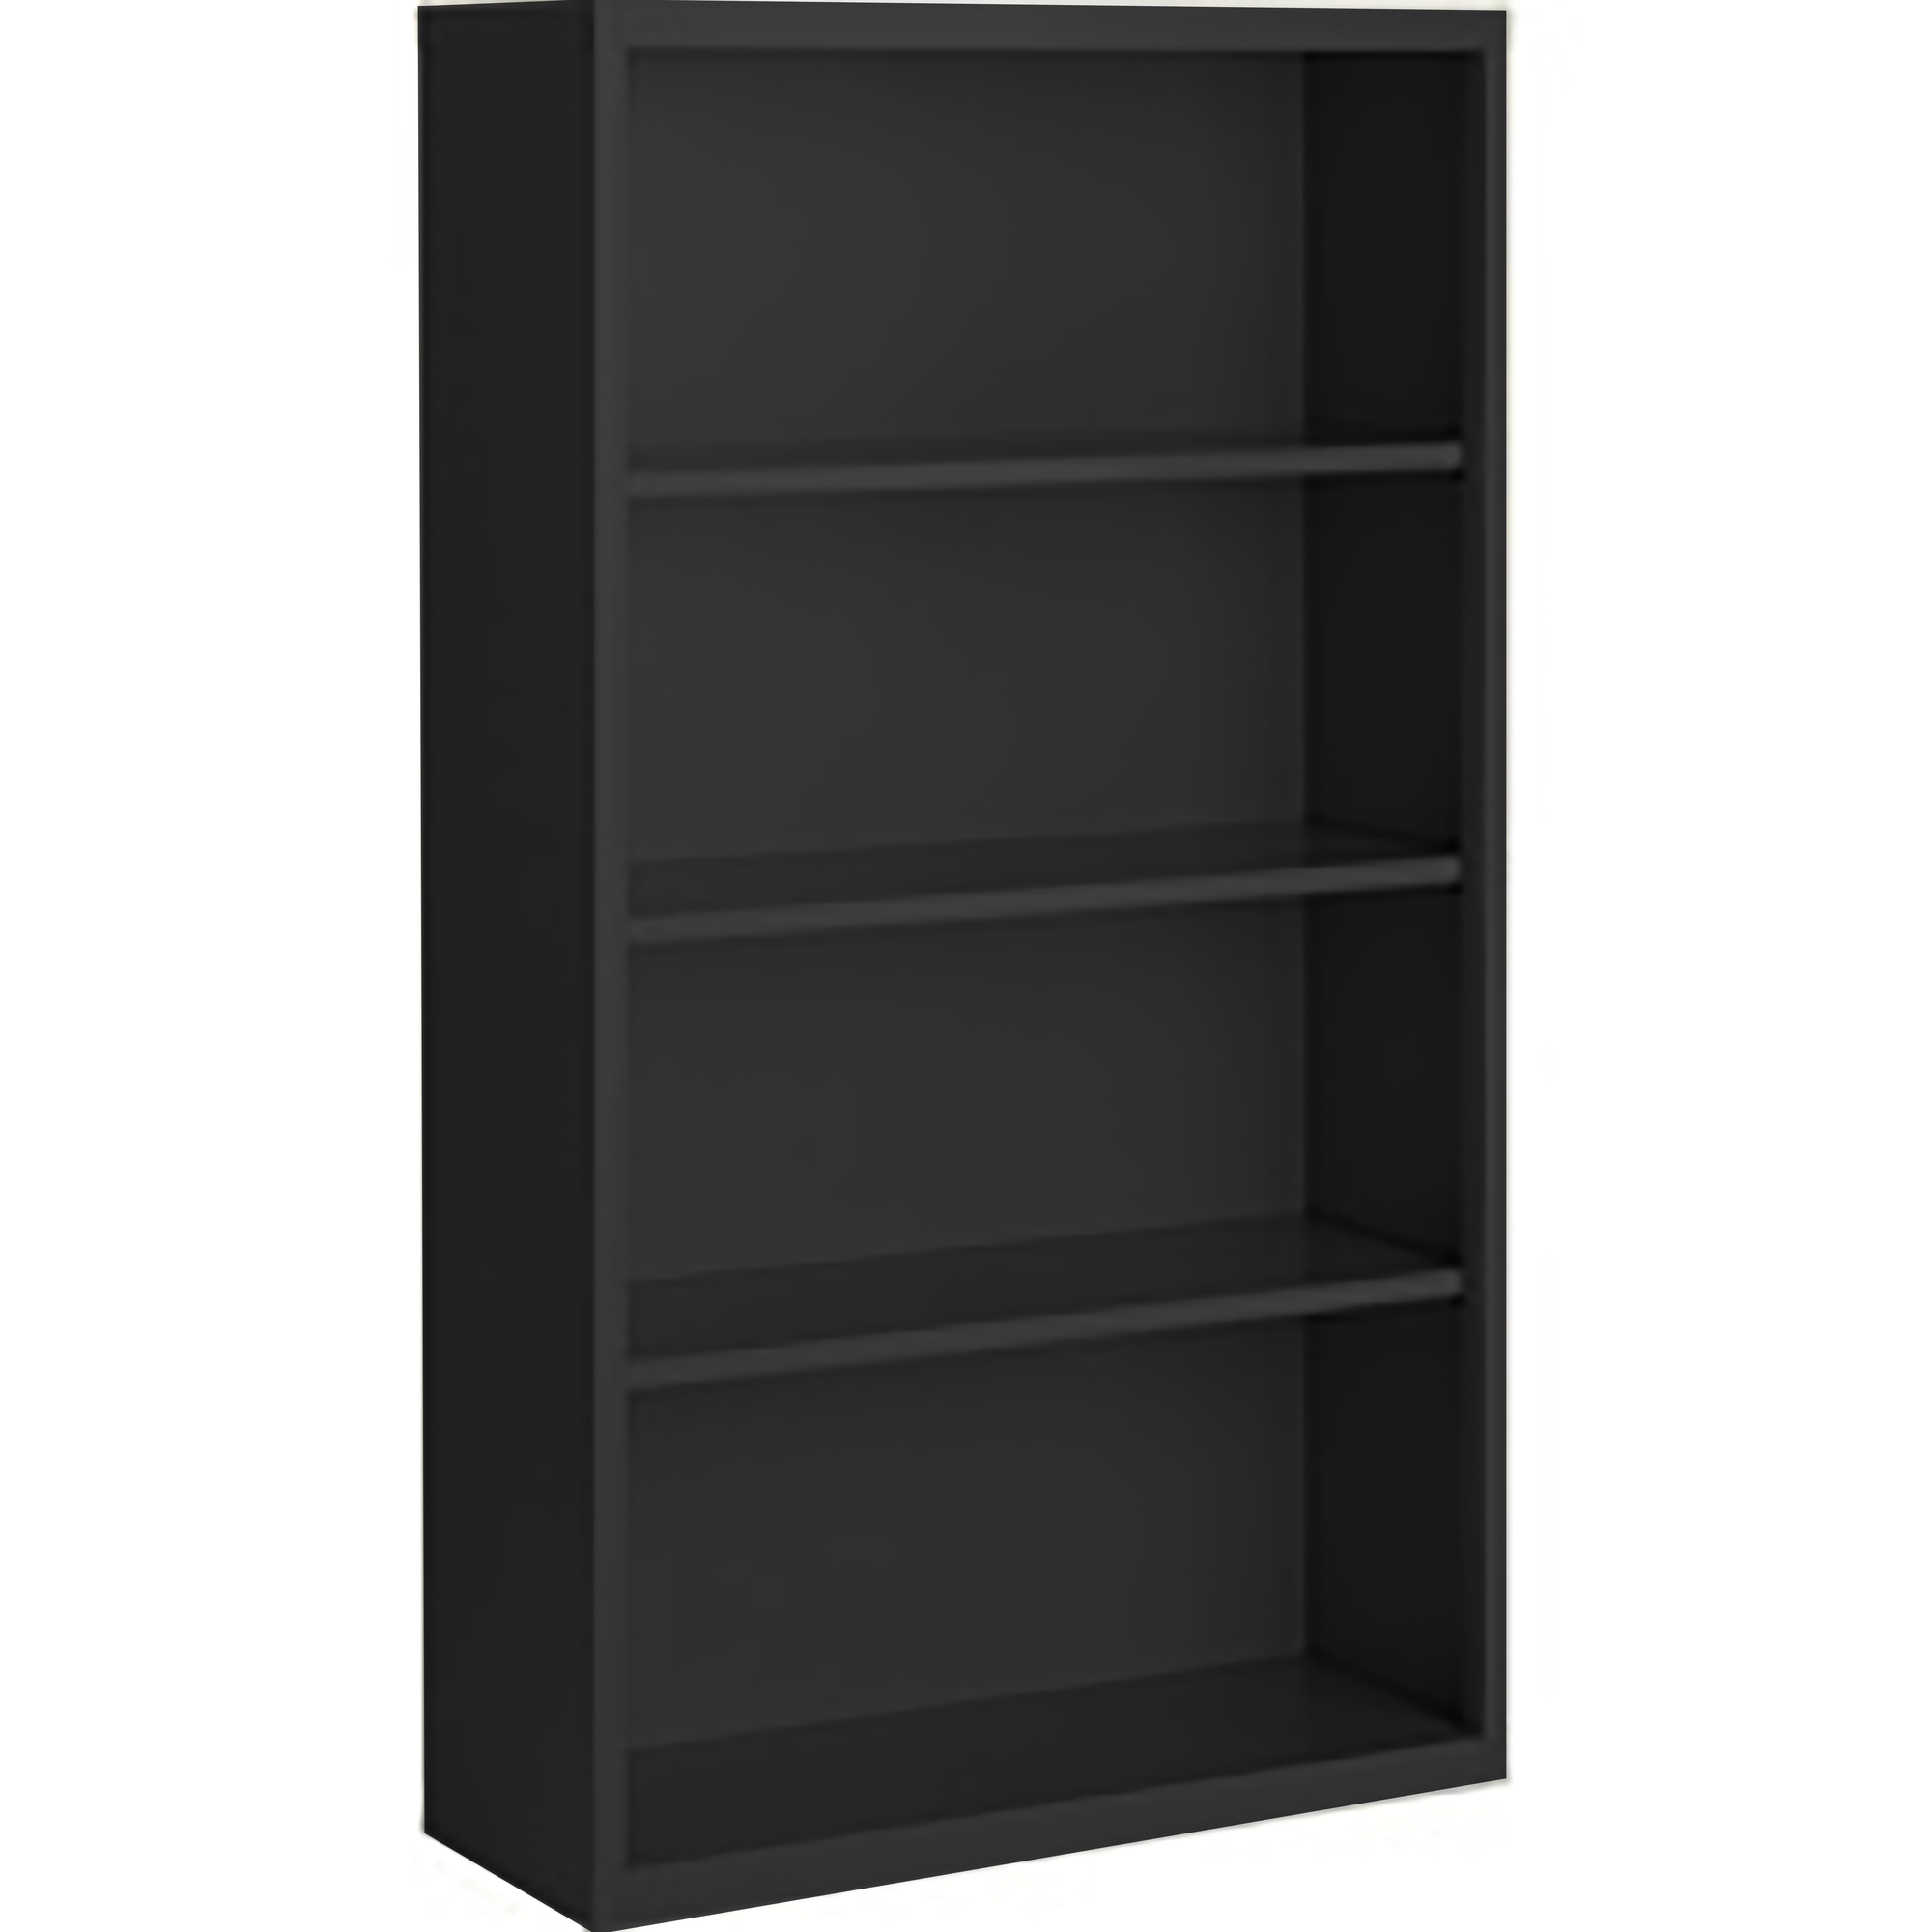 Steel Cabinets USA, 36Inchx13Inchx60Inch Black Bookcase Steel Fully Assembled, Height 60 in, Shelves (qty.) 4, Material Steel, Model BCA-366013-B